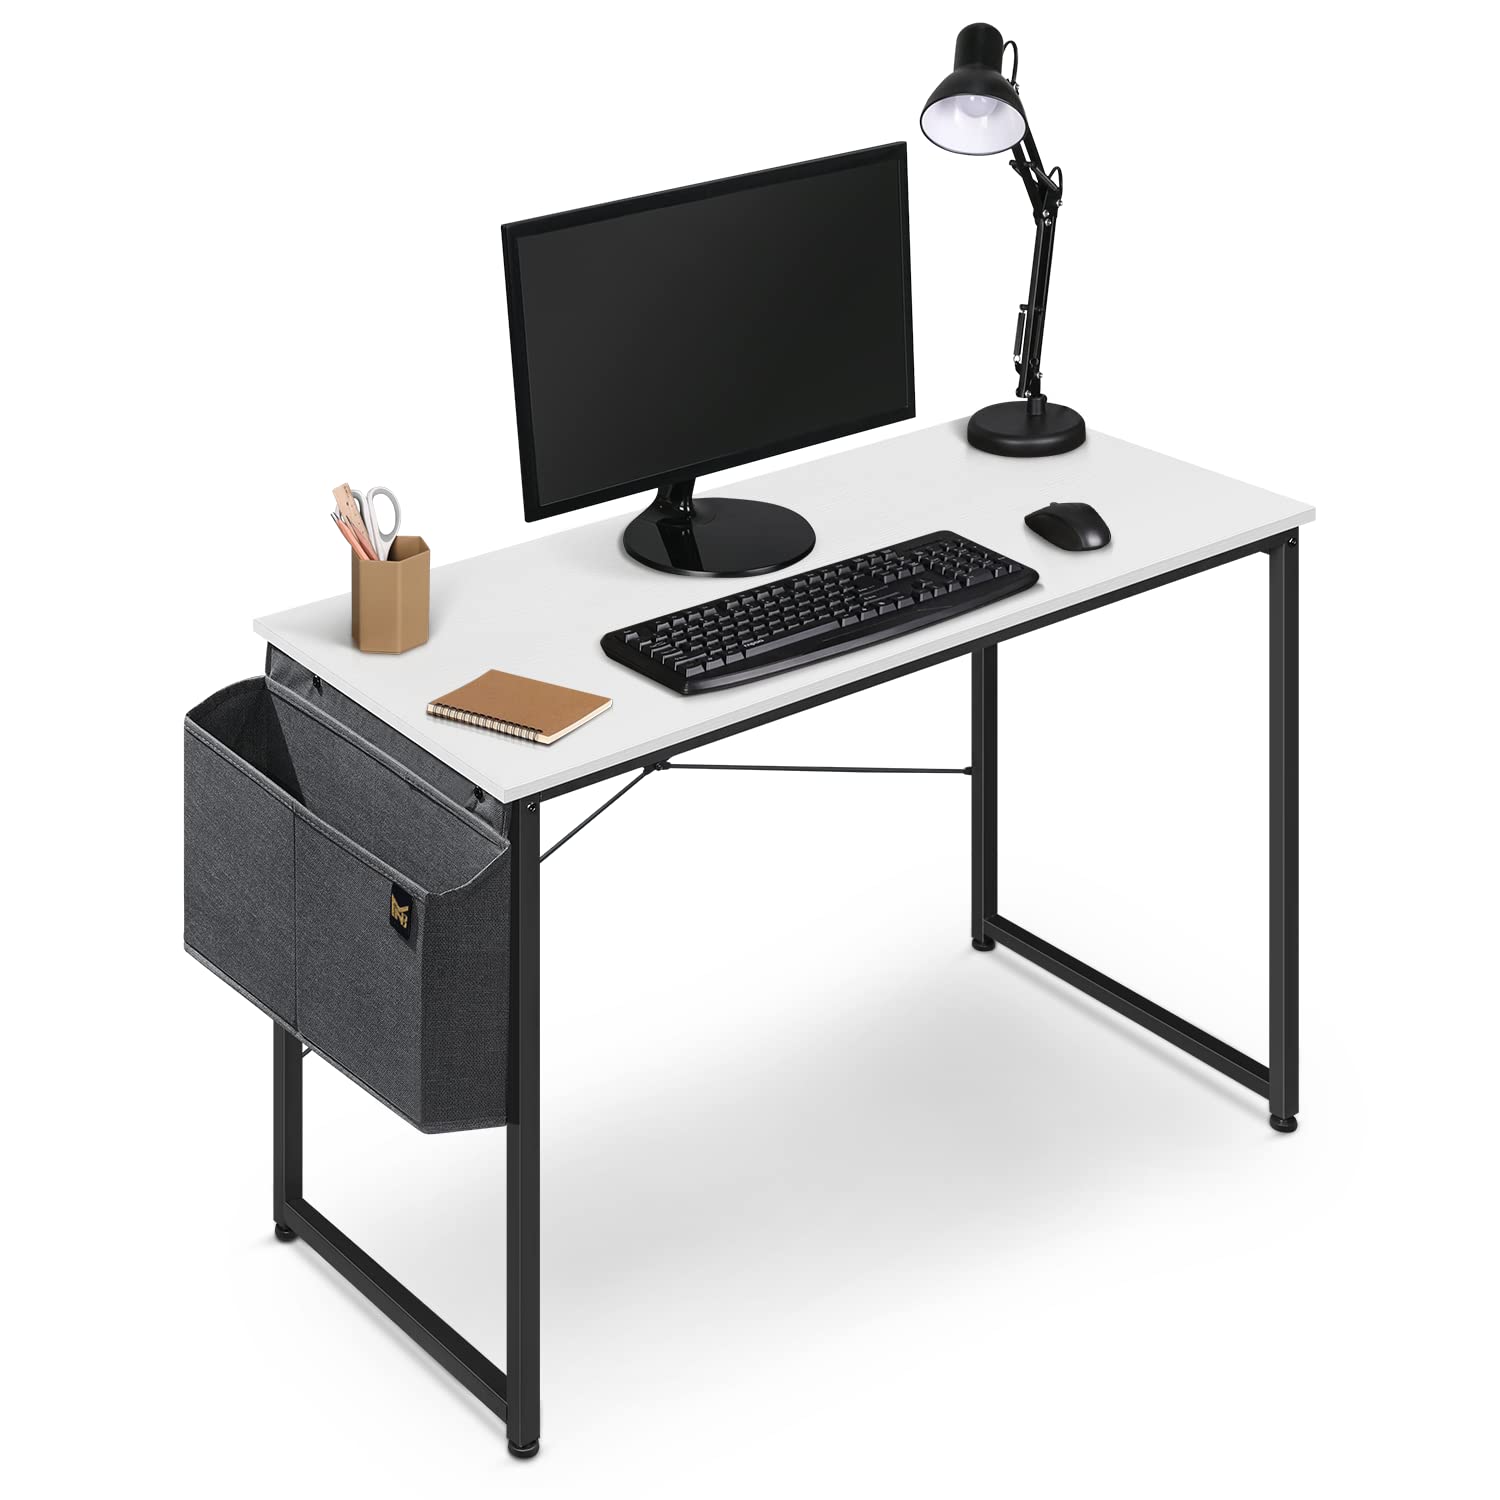 MoNiBloom computer Desk 40 Inches with A Storage Bag, Student Laptop Writing Desks for Samll Space Home Office, White